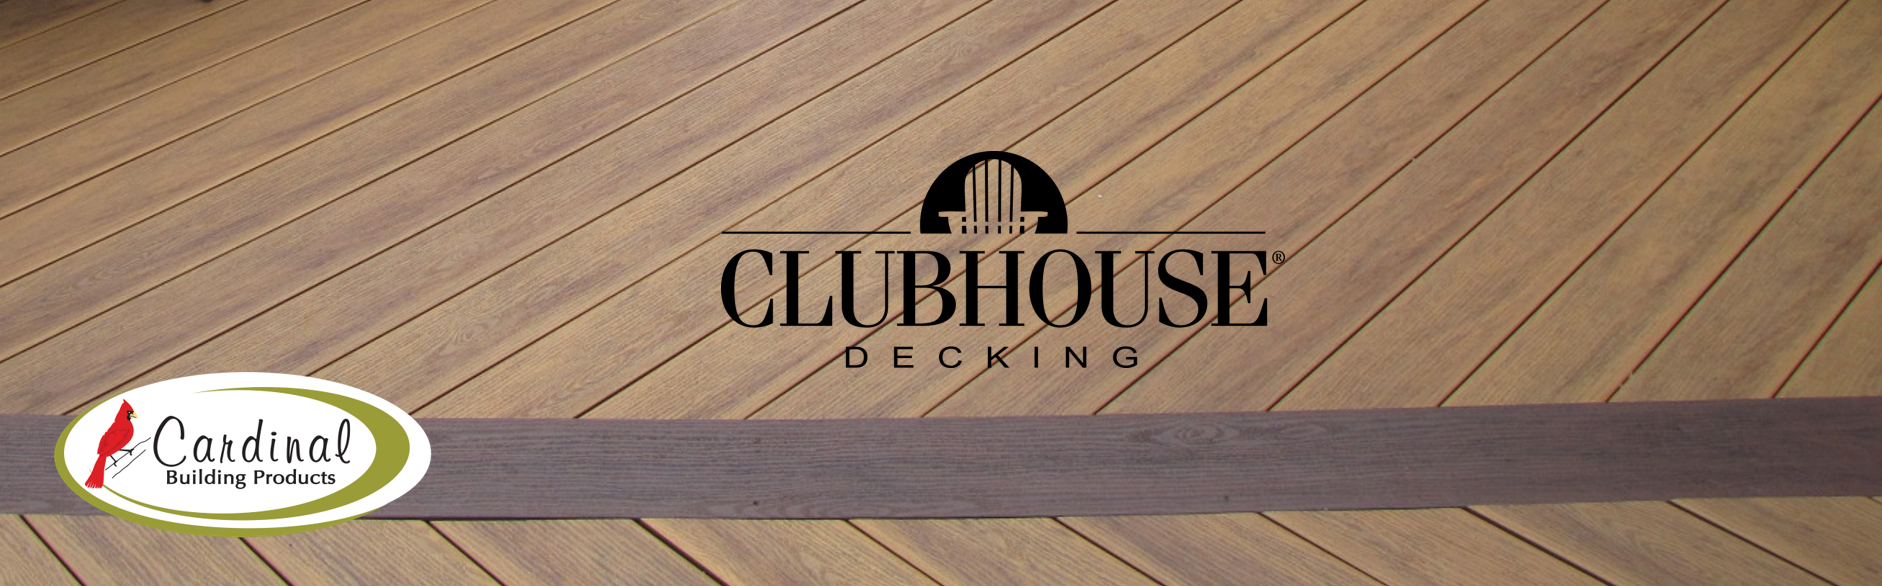 Clubhouse Decking Products Cardinal Building Products in size 1882 X 586